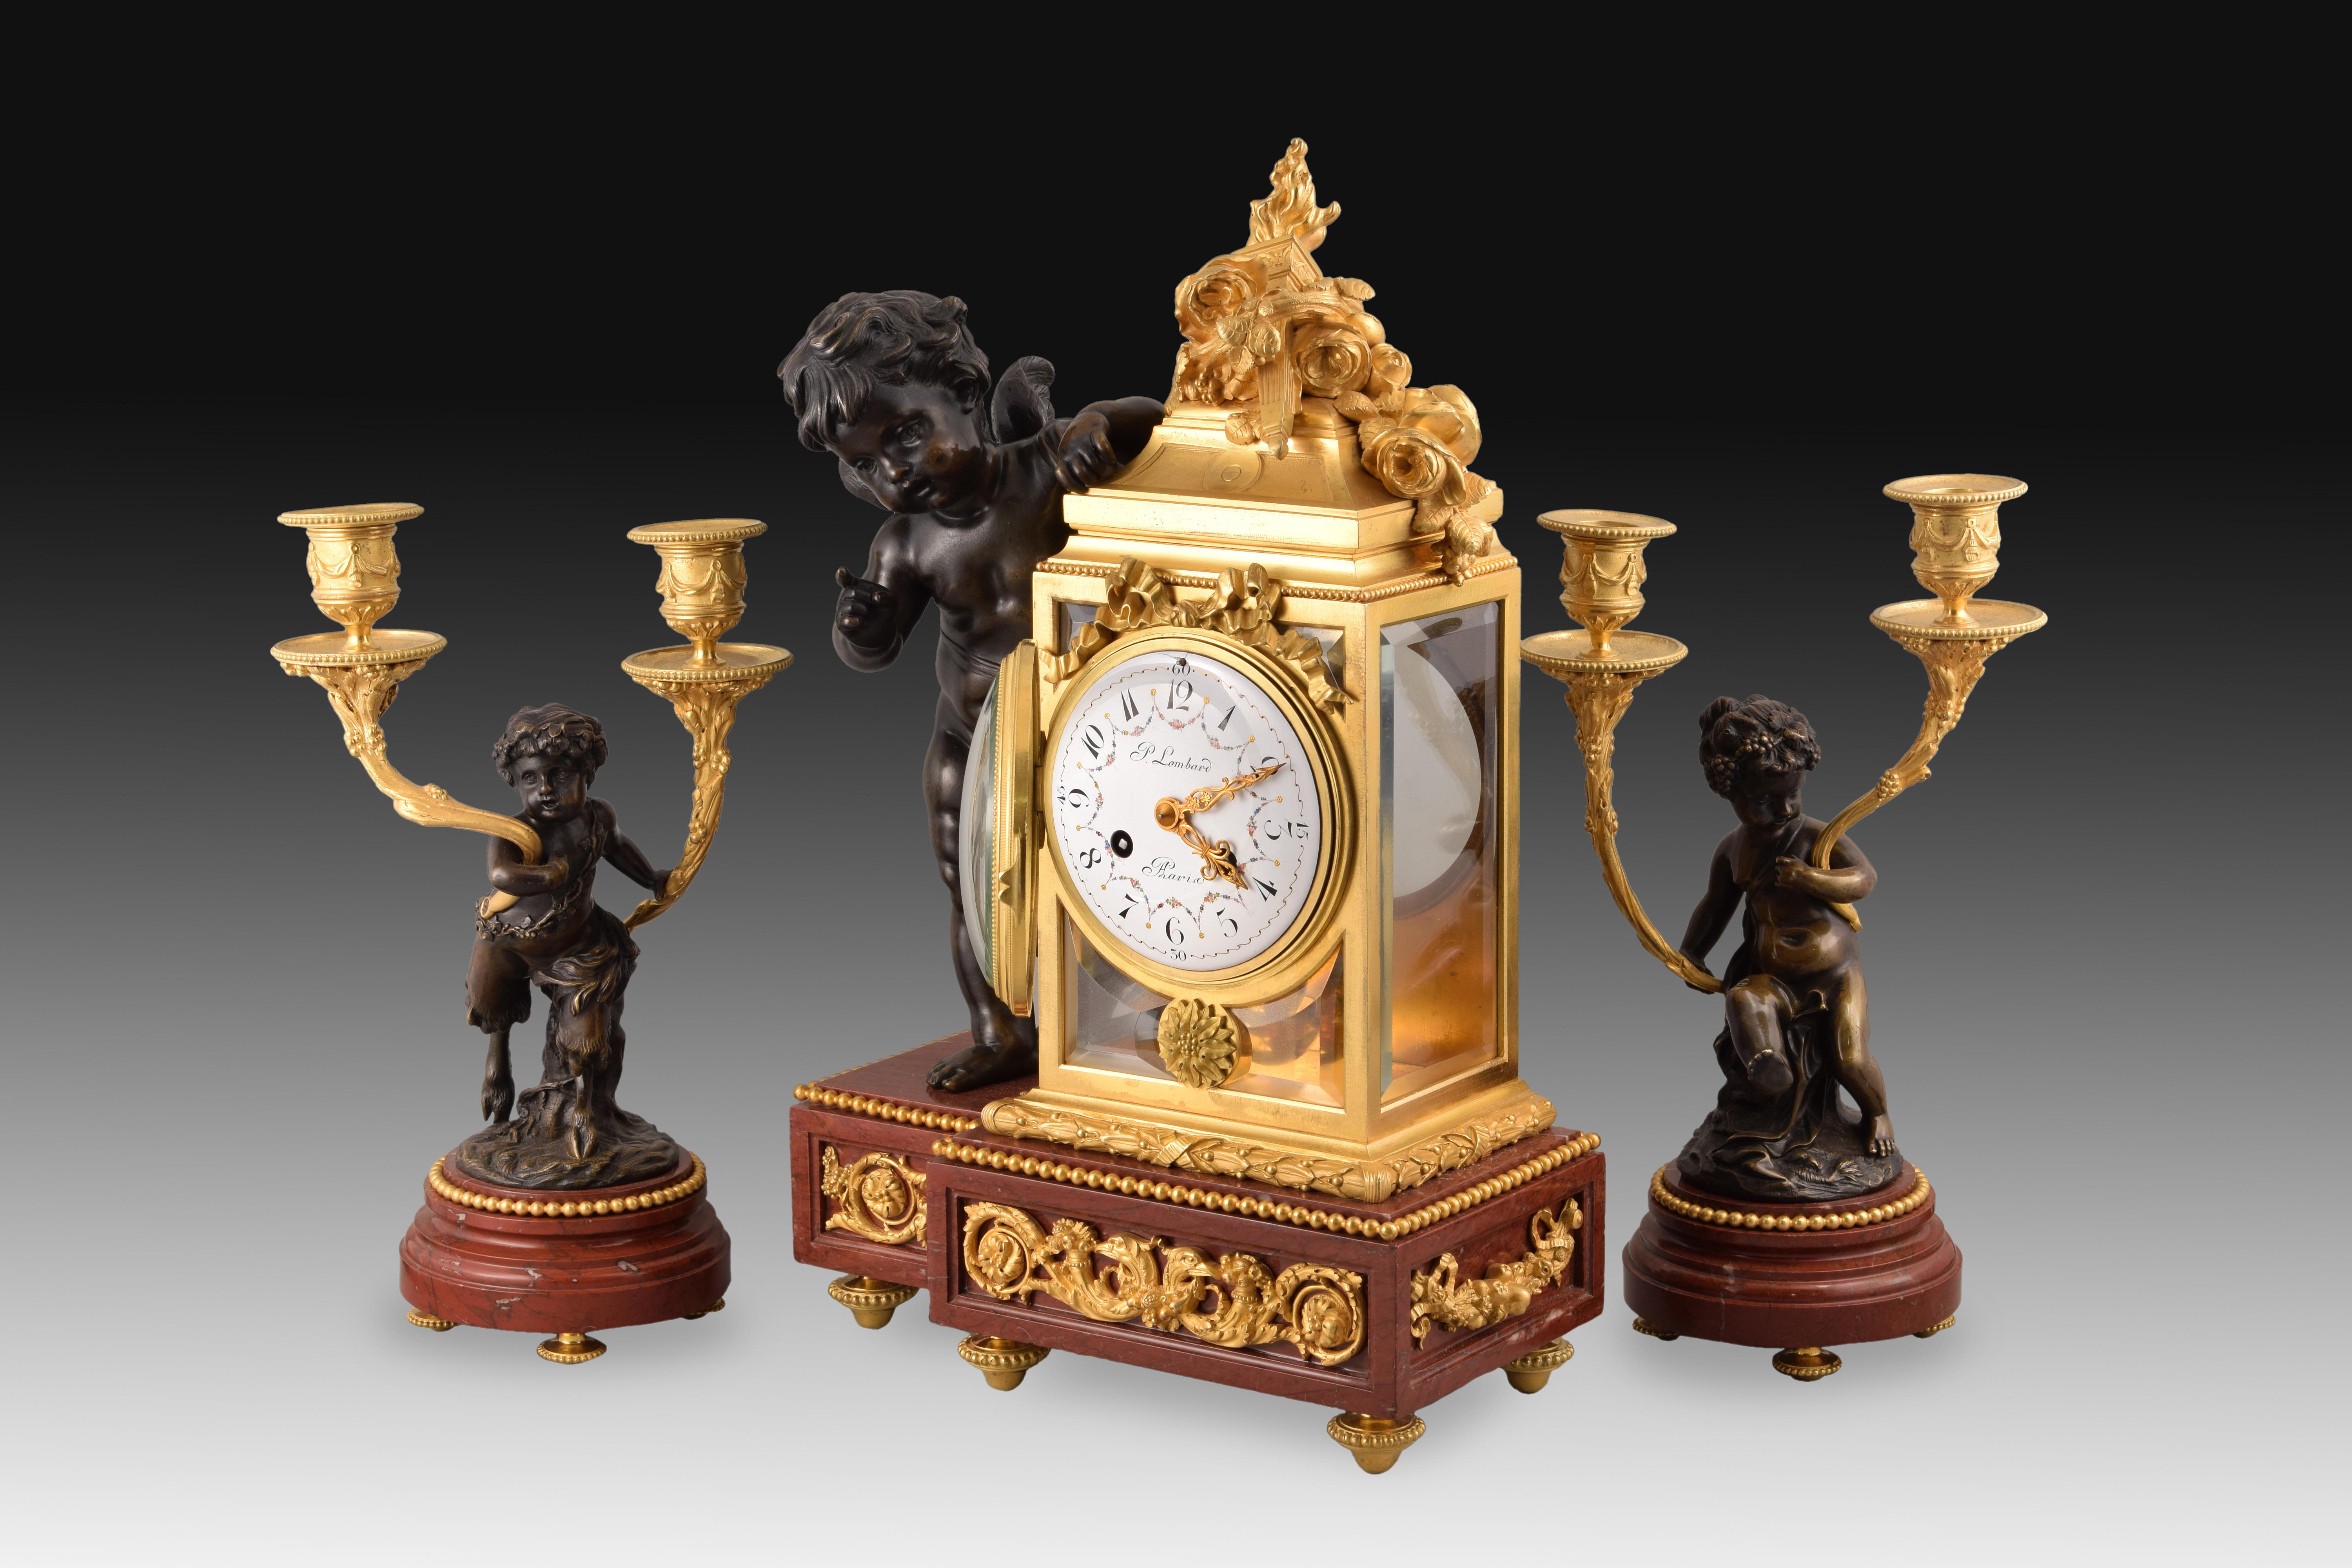 Clock garnish and two candlesticks. Bronze, rouge griotte marble. France, 19th century, following Clodion's models. 
Set or garnish consisting of a table clock and two candlesticks with two lights each, made of blued and gilt bronze and rouge